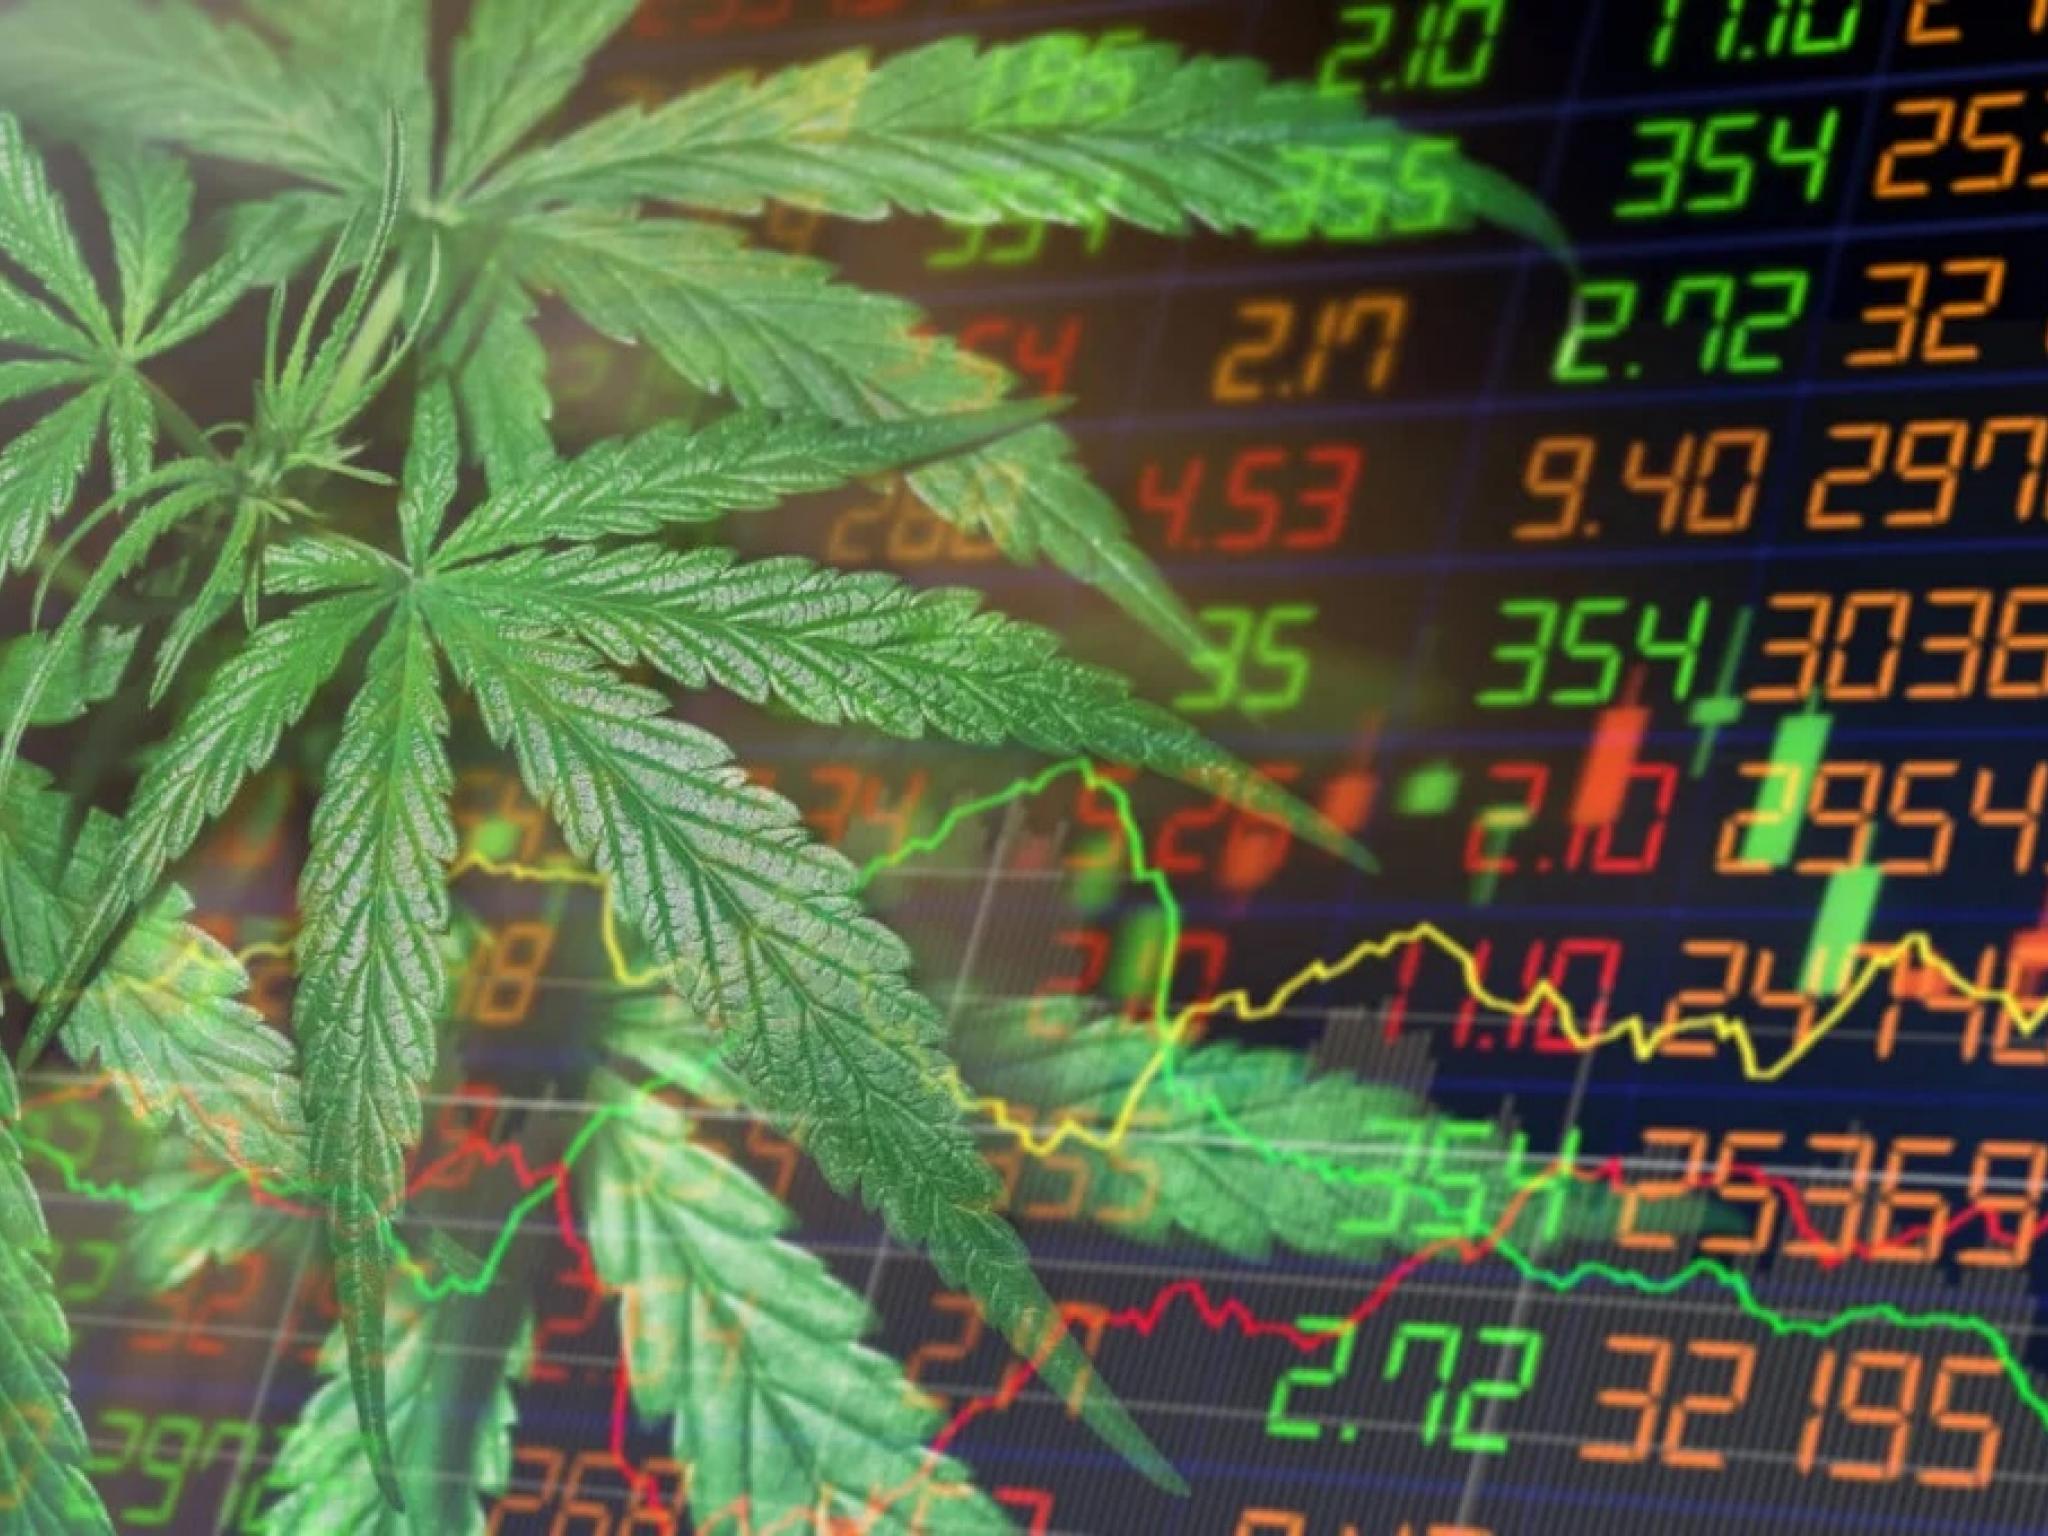  schwazze-records-8-revenue-growth-in-q4-2023-amid-competitive-cannabis-retail-landscape-corrected 